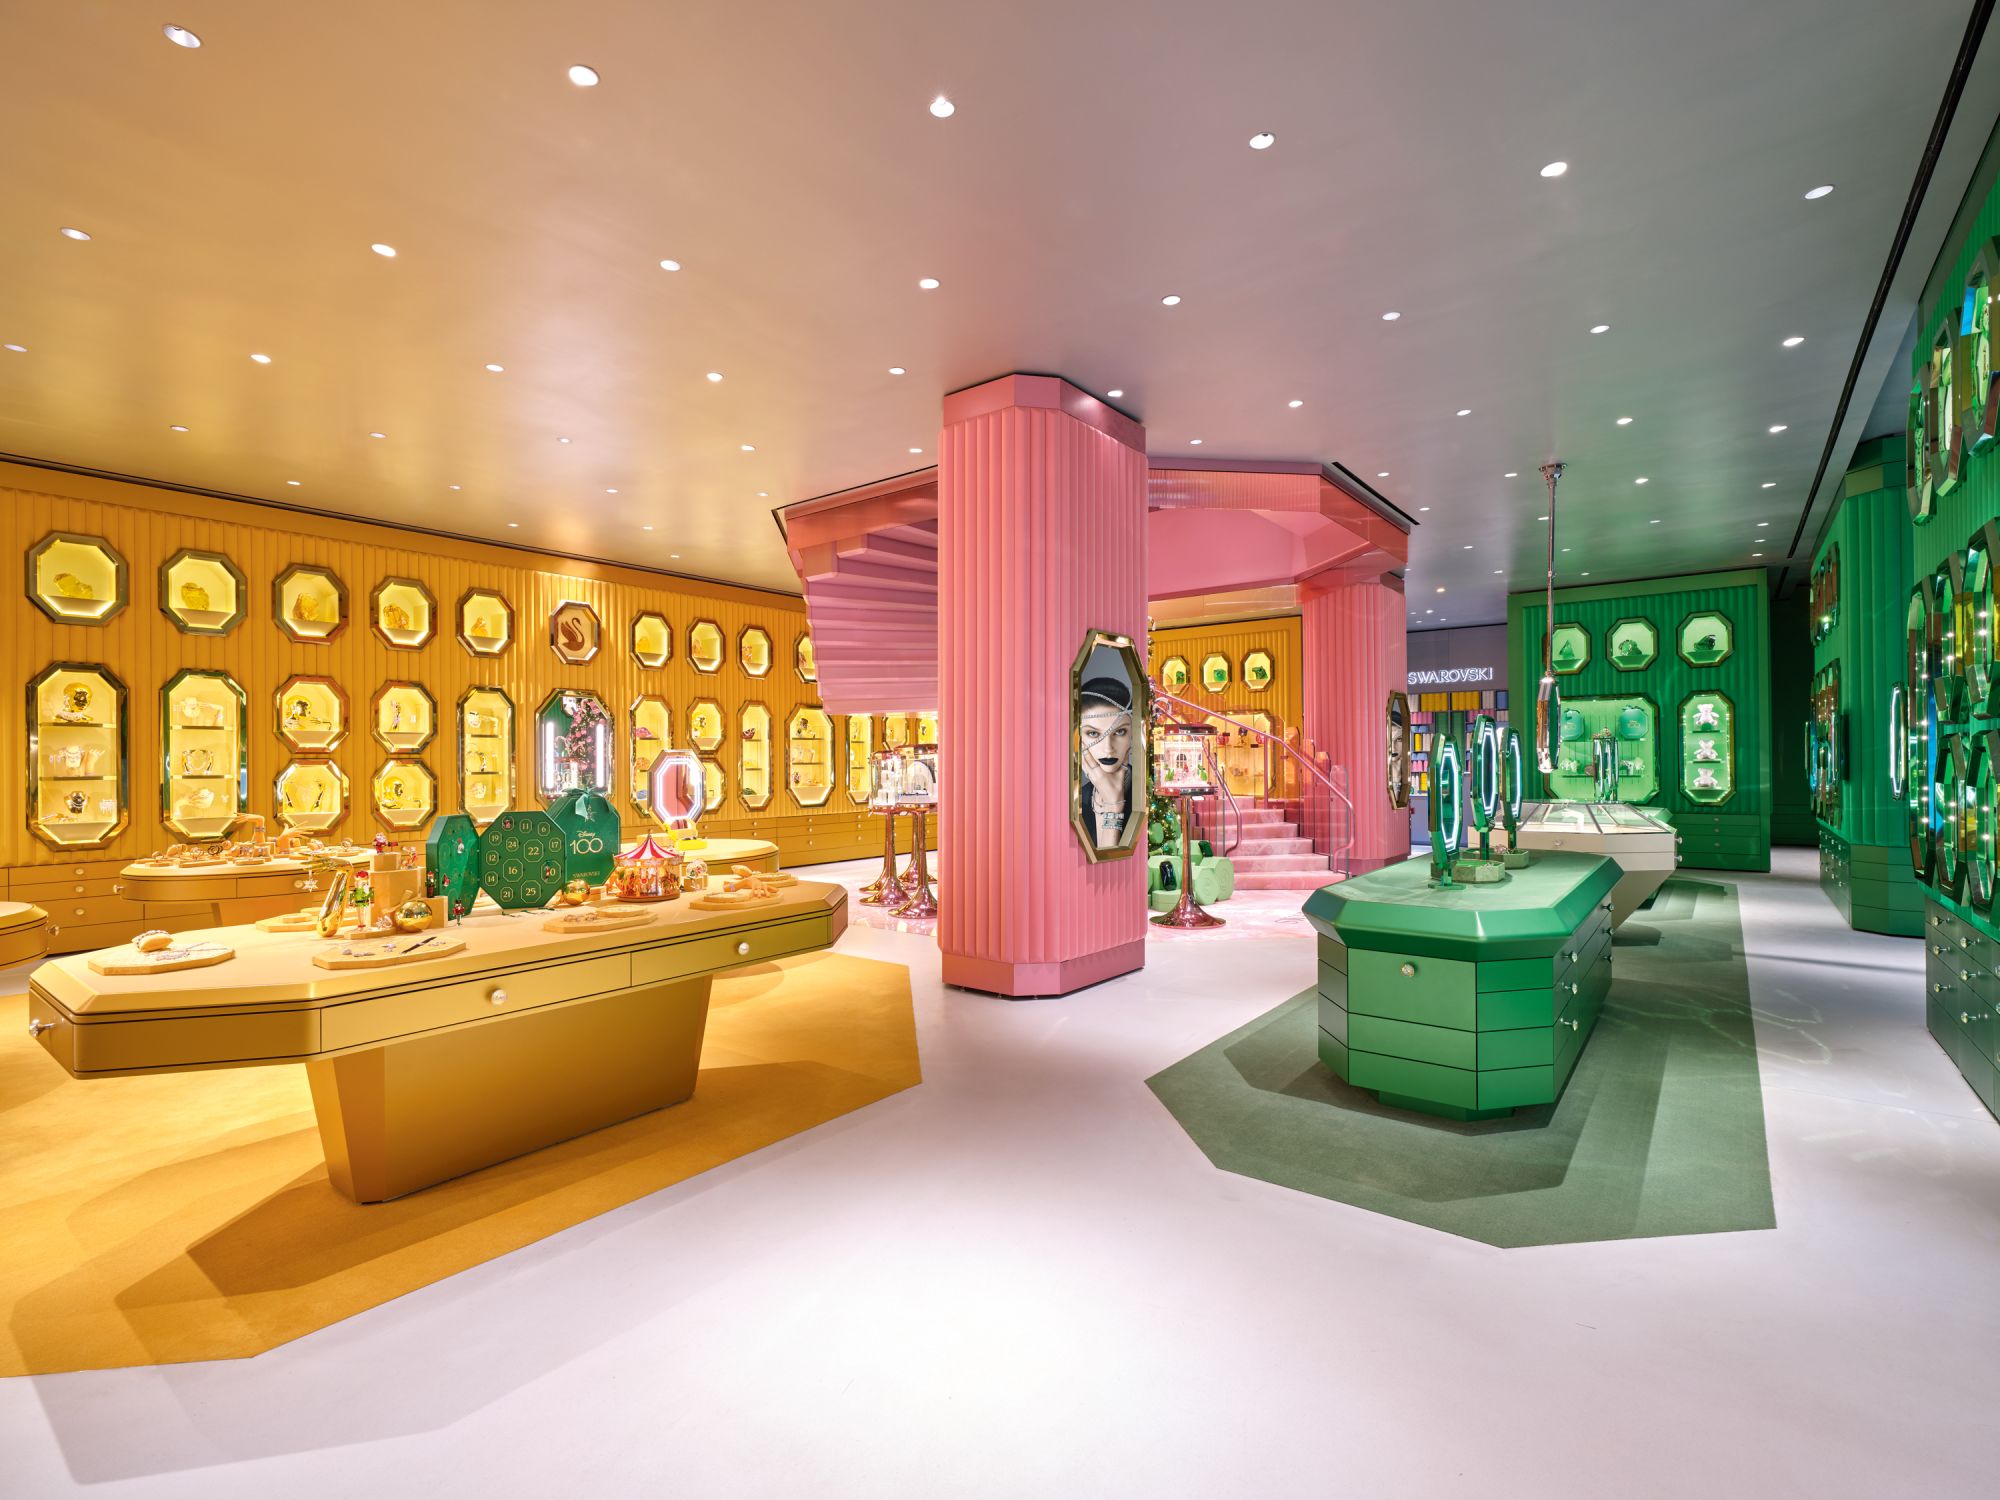 Step inside Swarovski's new glittering, candy-colored flagship